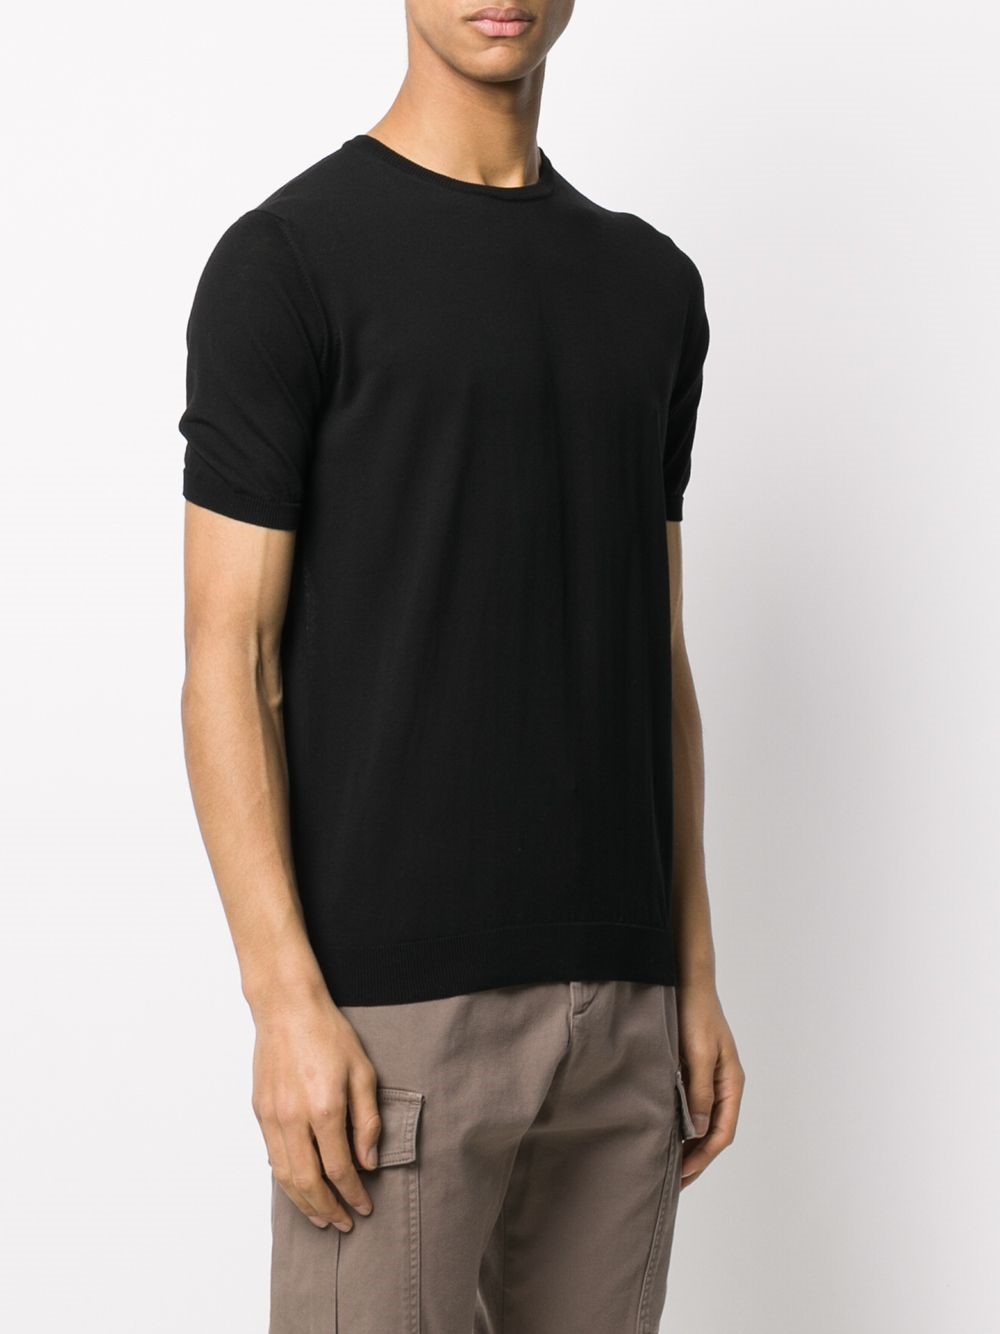 roberto collina T-SHIRT available on montiboutique.com - 34138